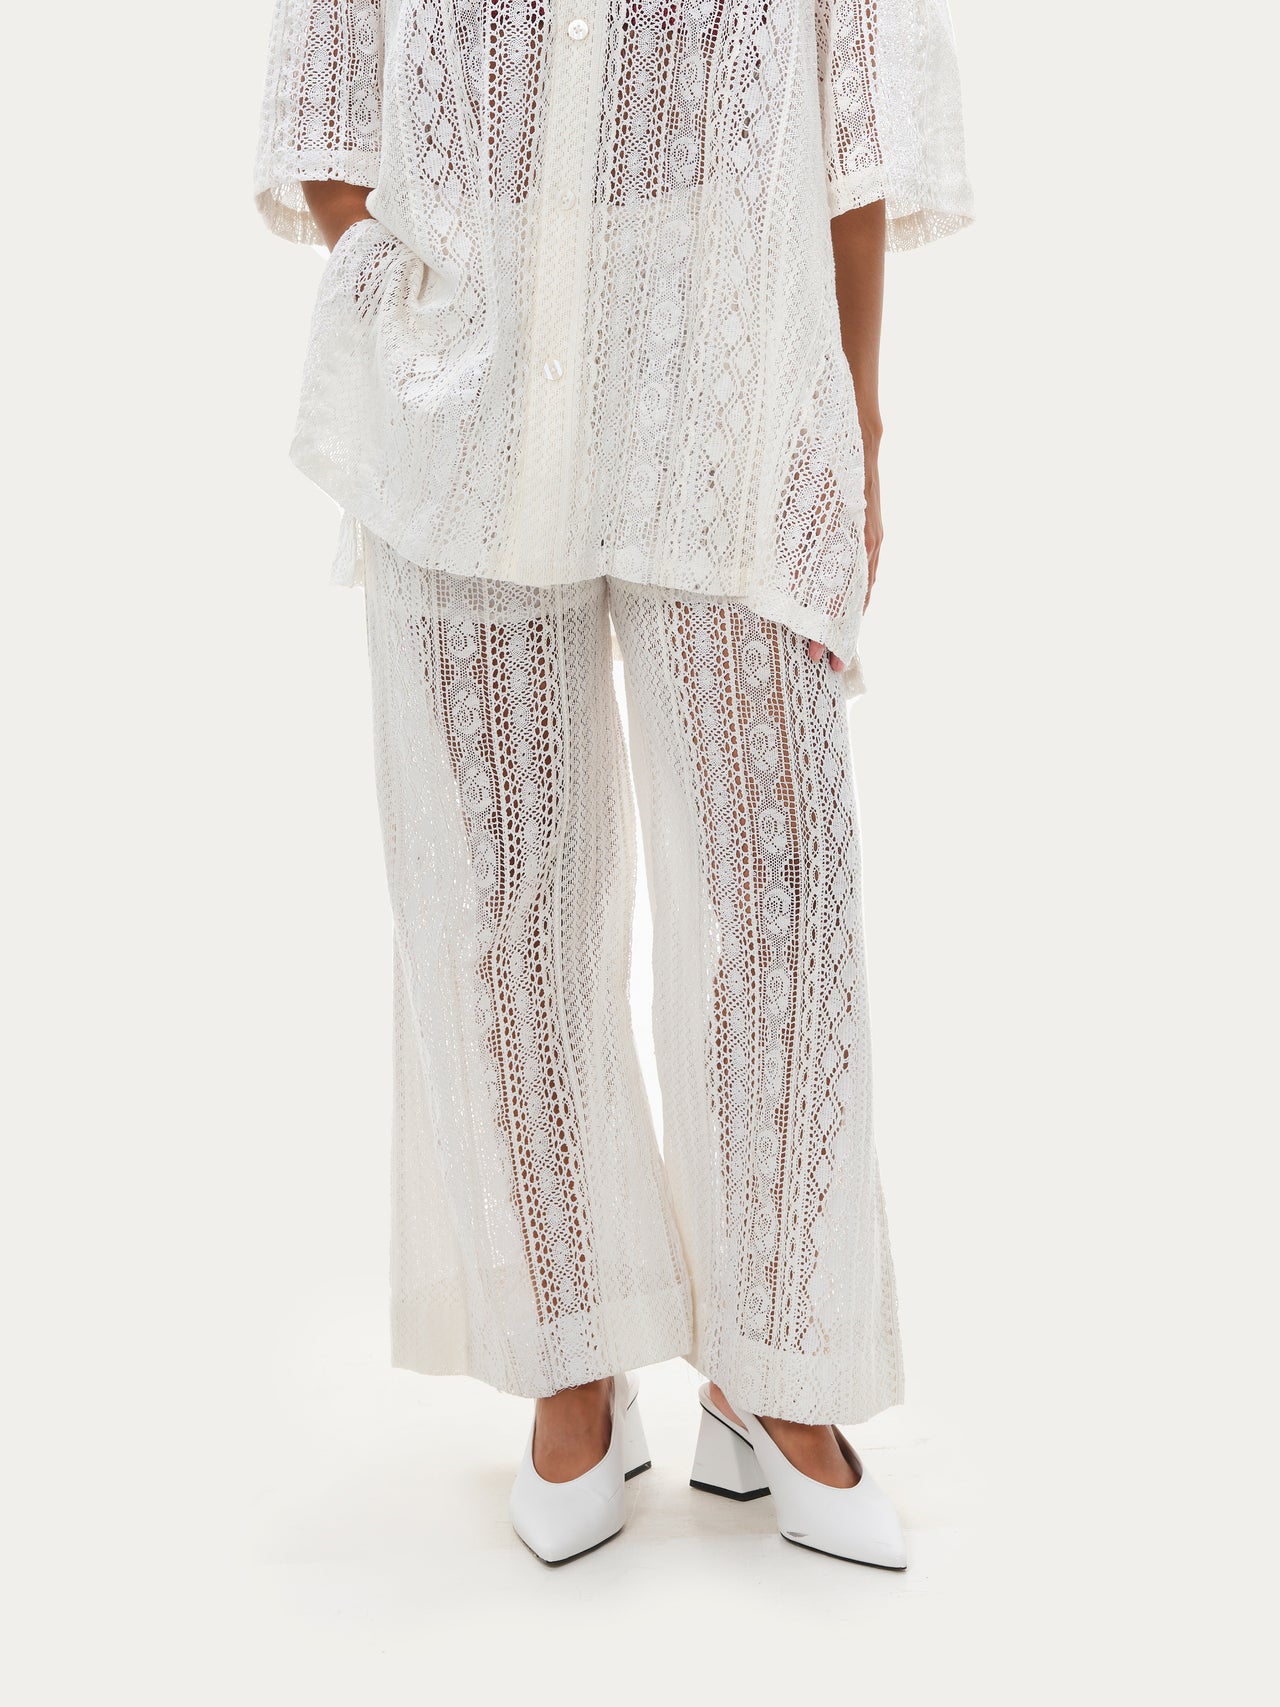 Lace flare pants - white